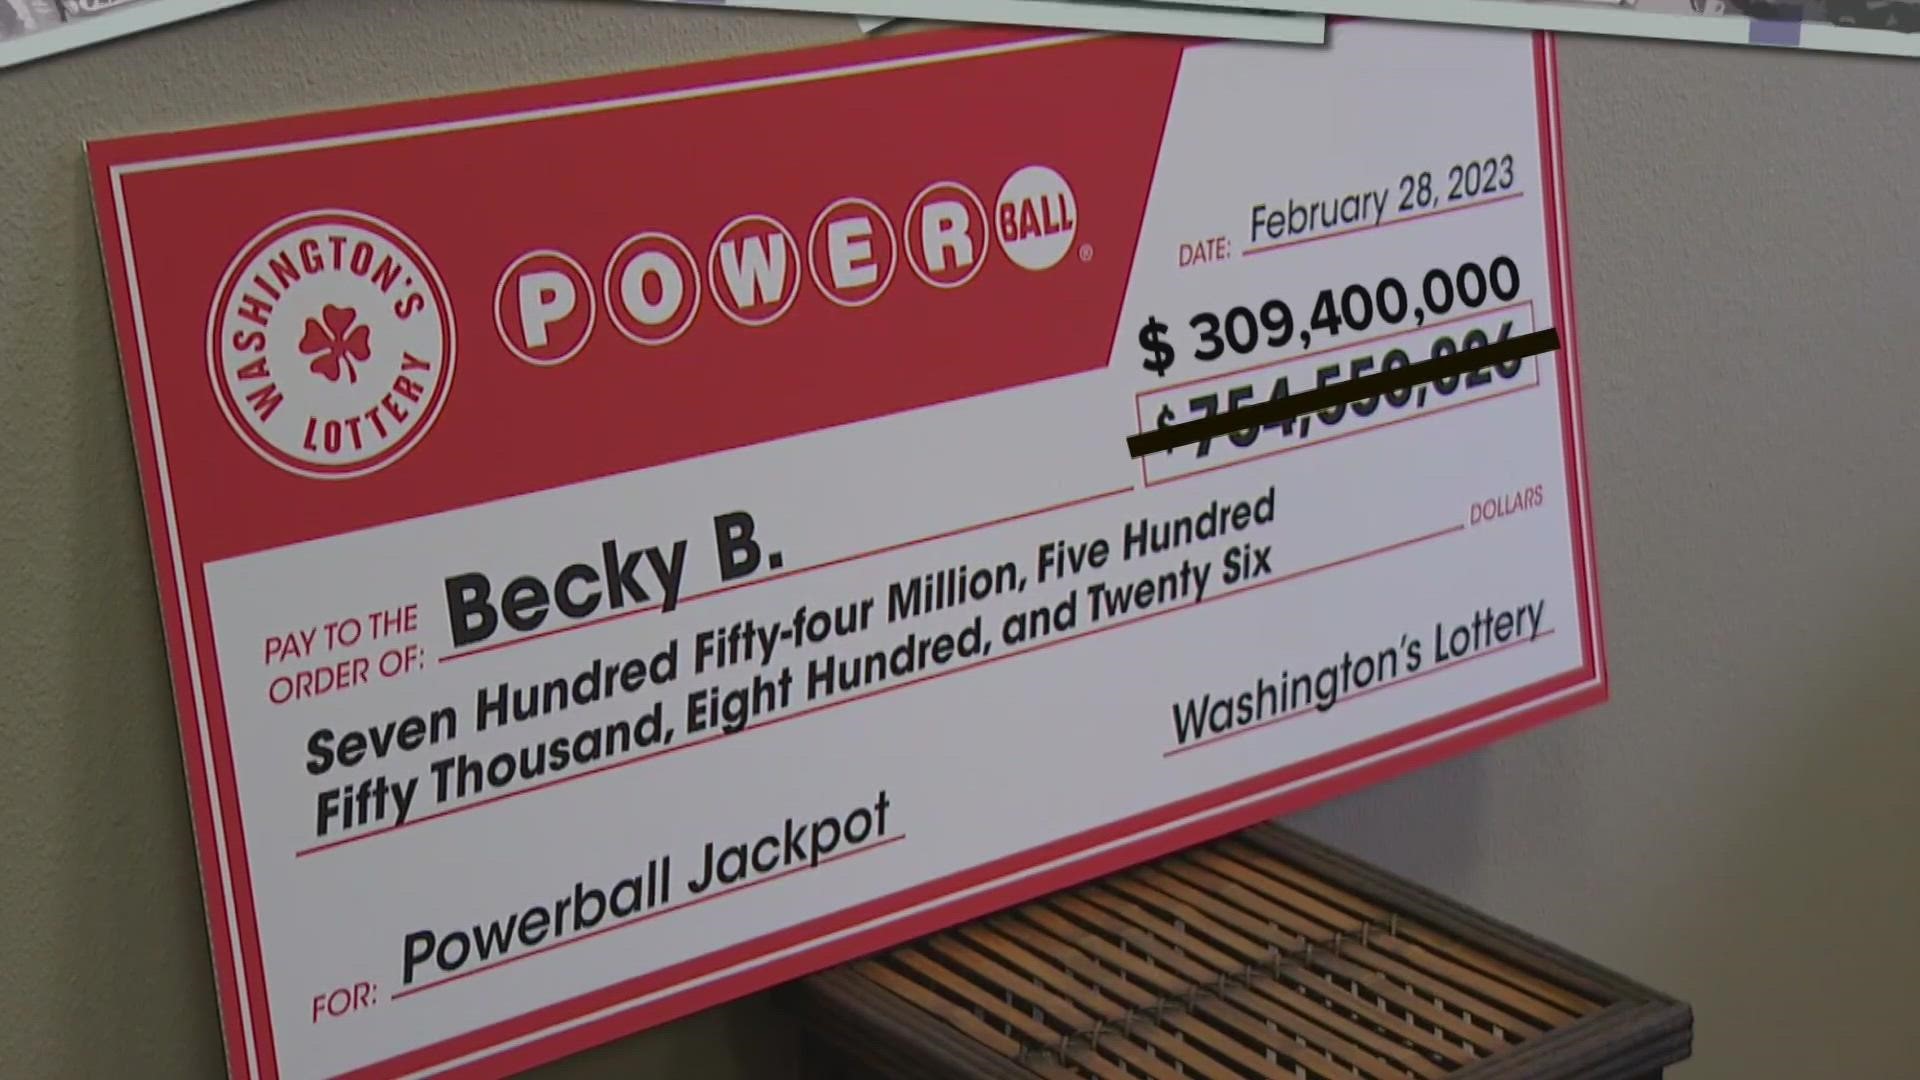 She chose the lump sum option, which is where you get the prize immediately in cash. After taxes, she walked away with $309 million.